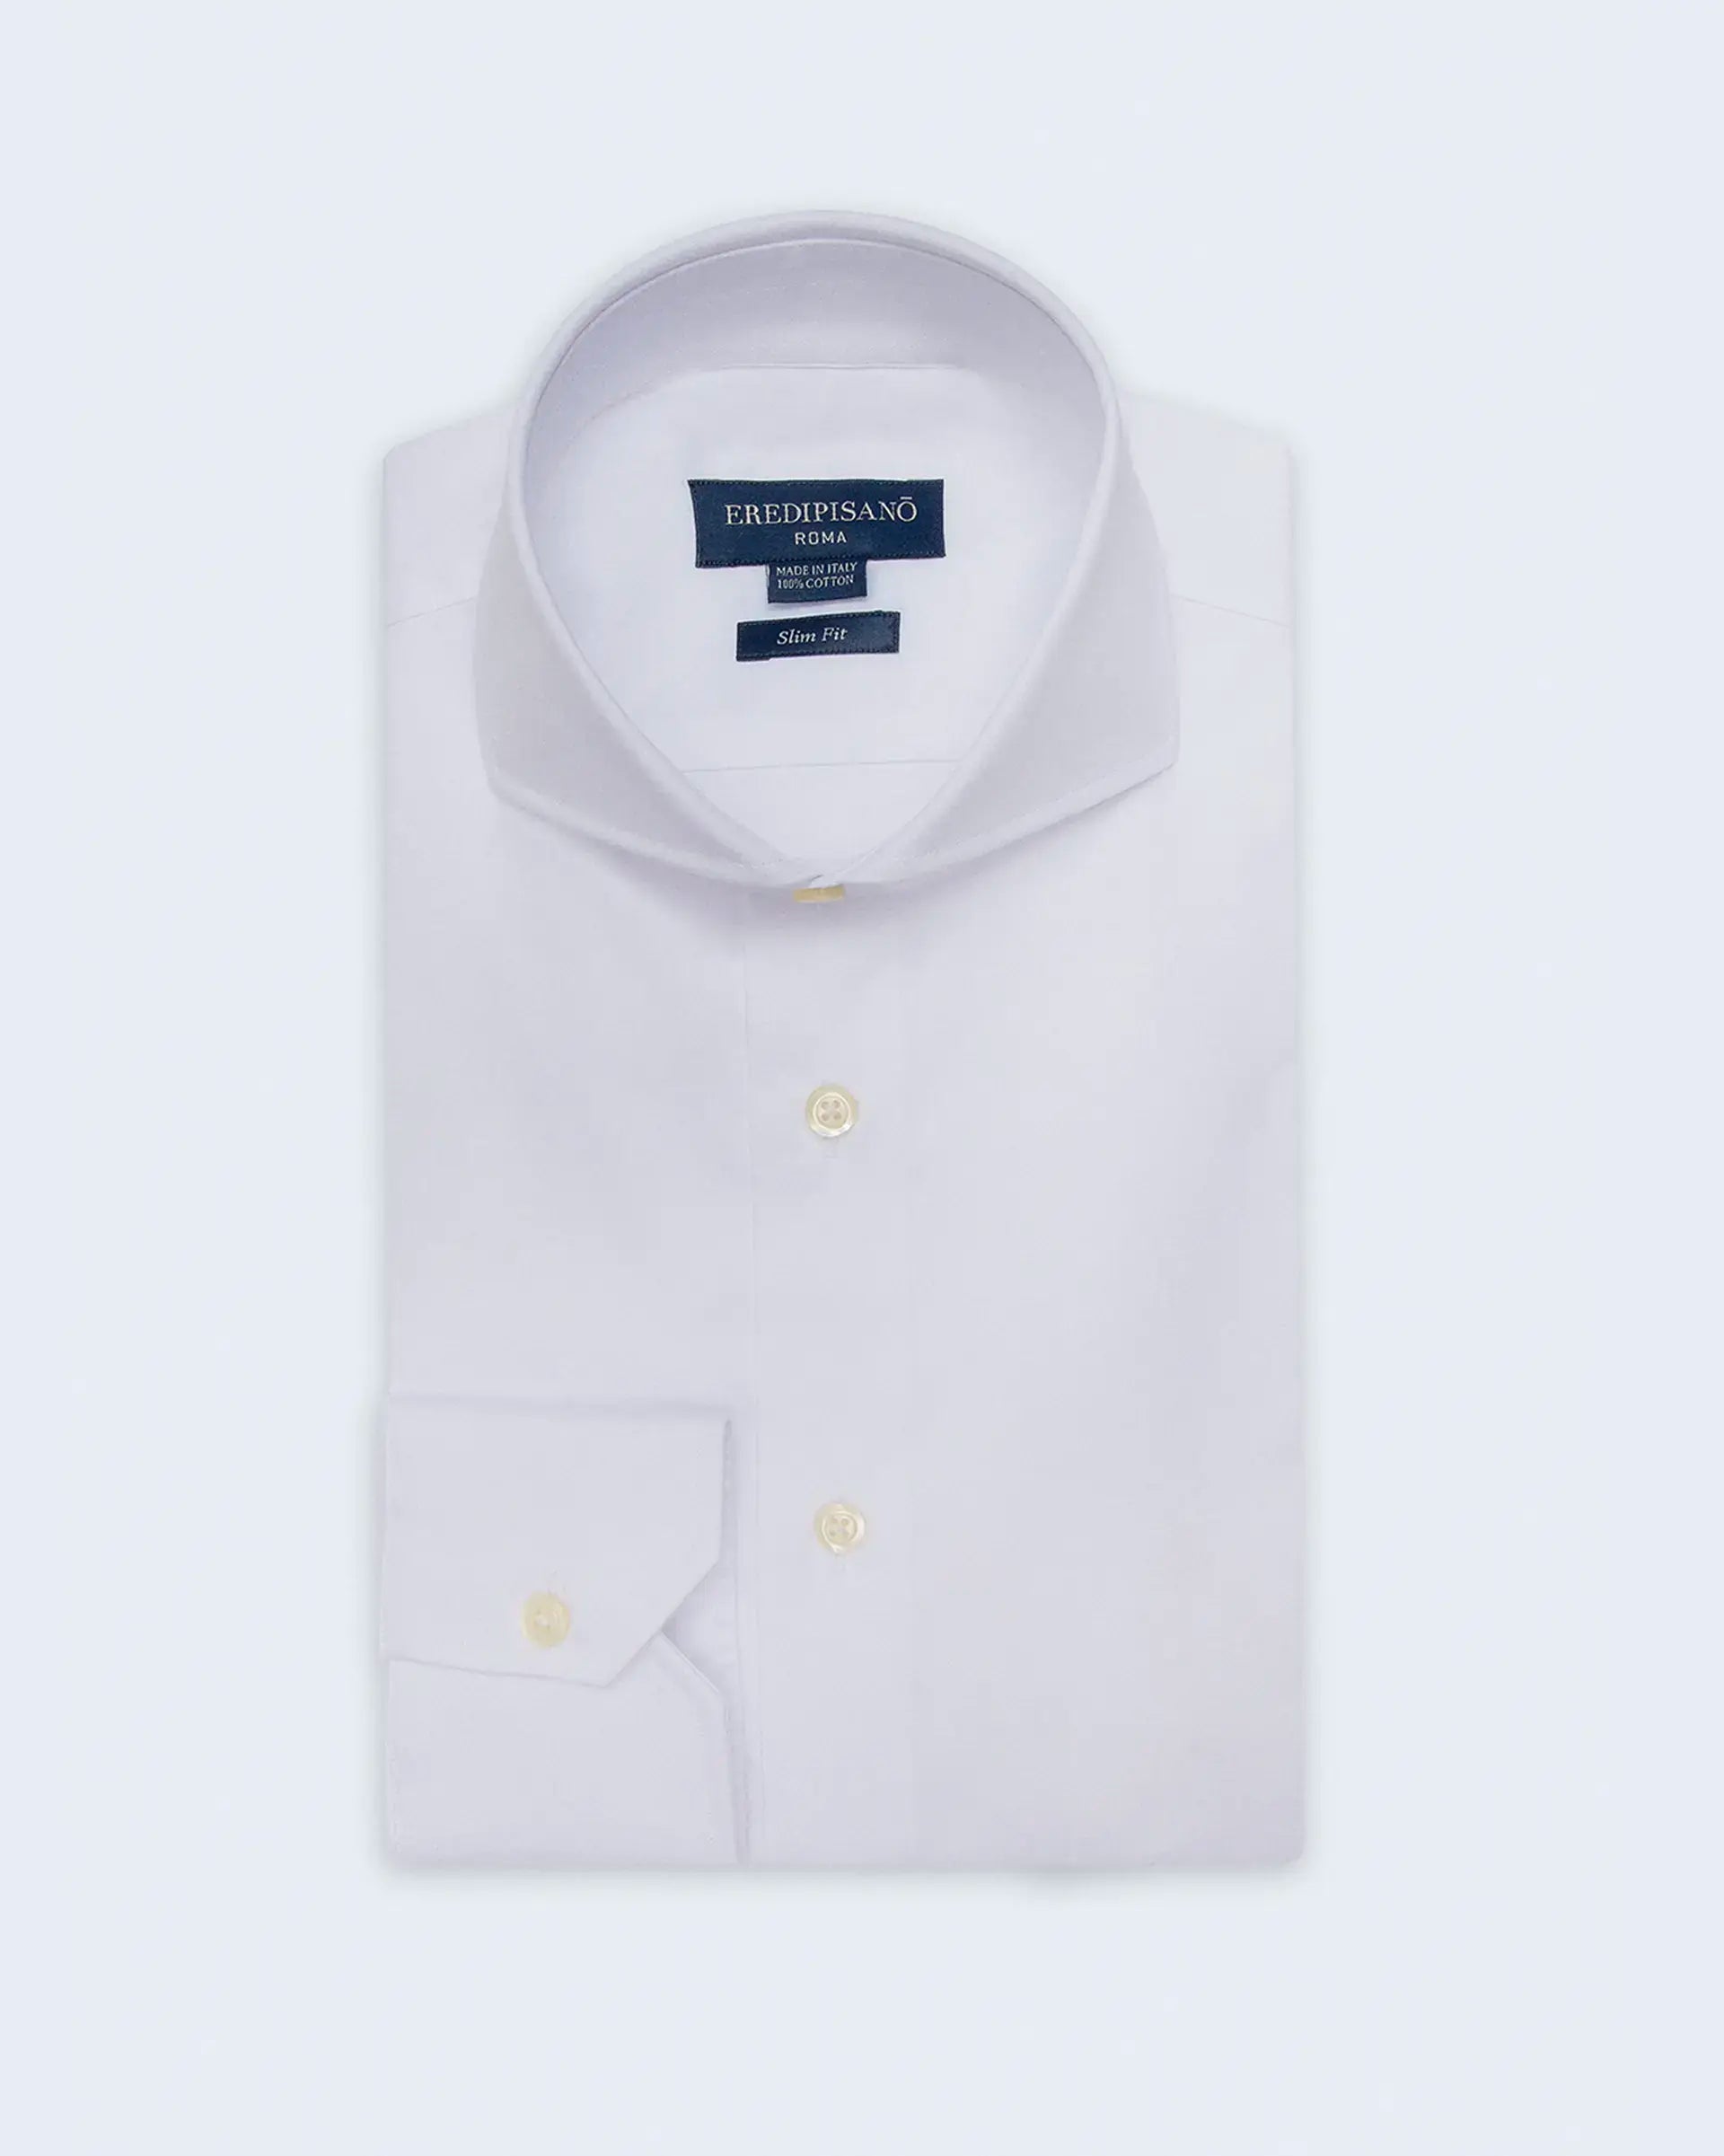 White shirt in slim fit cotton twill with Venice collar